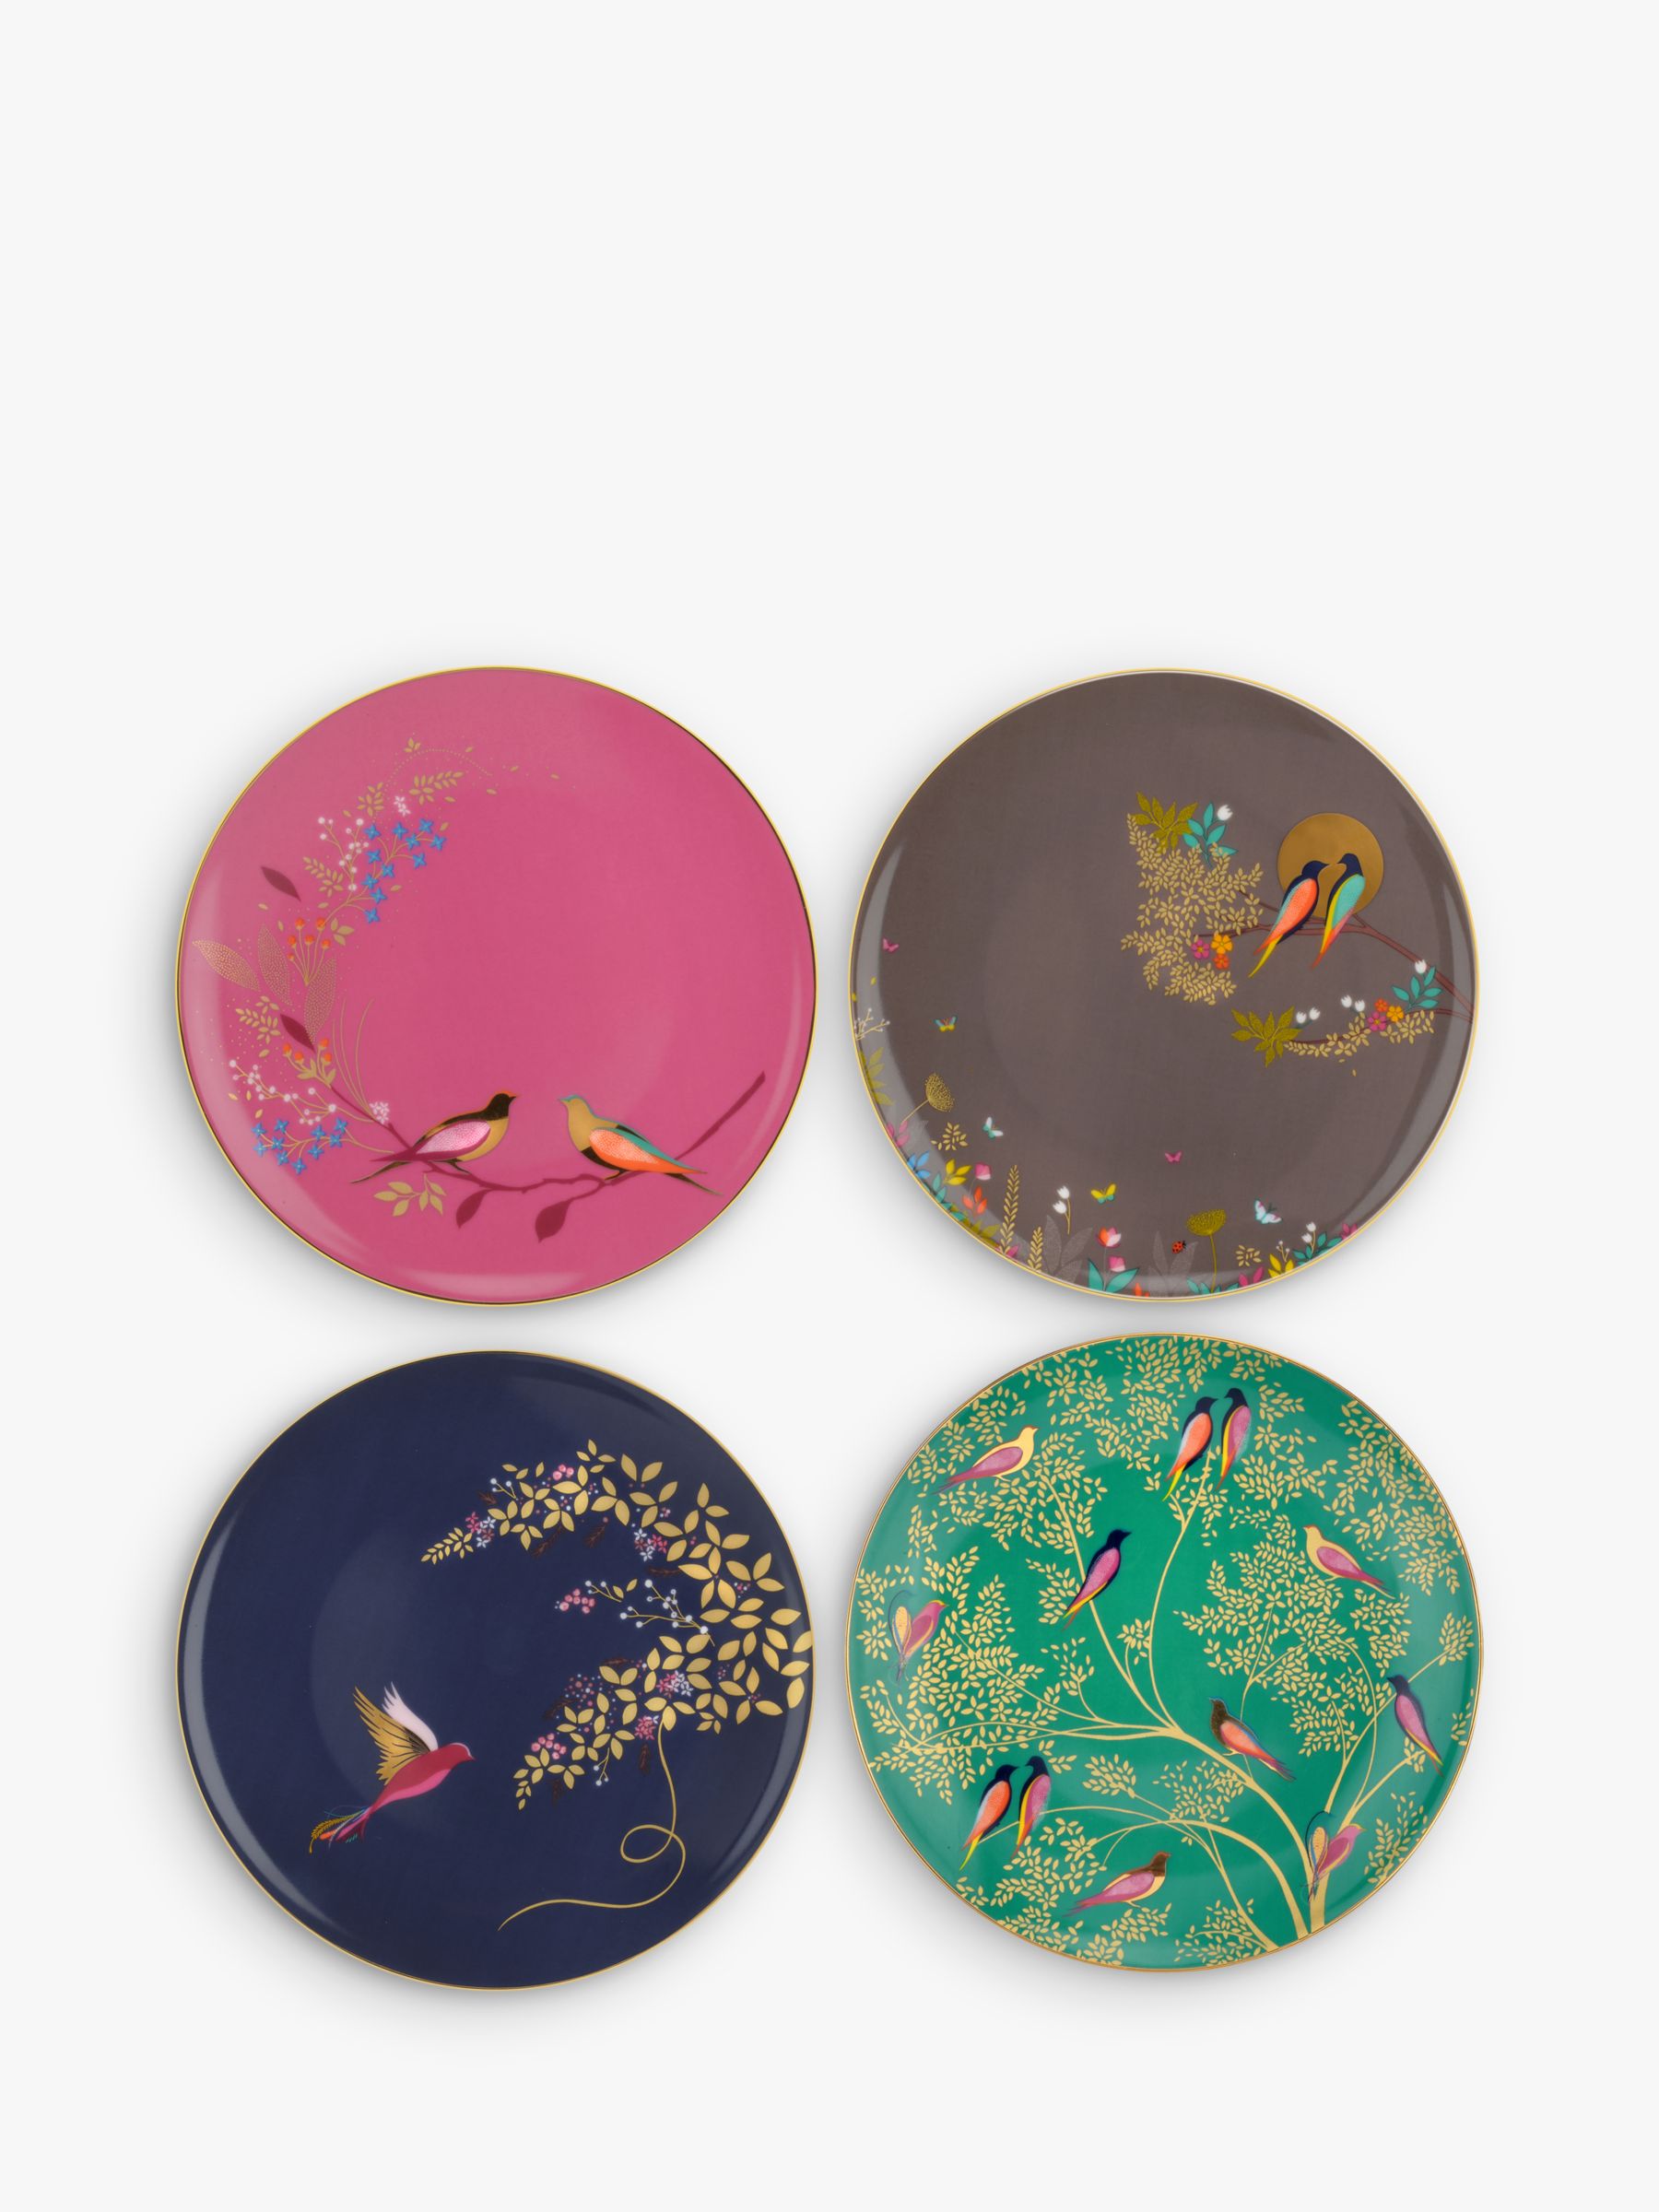 Sara Miller Chelsea Collection Birds Cake Plates Review